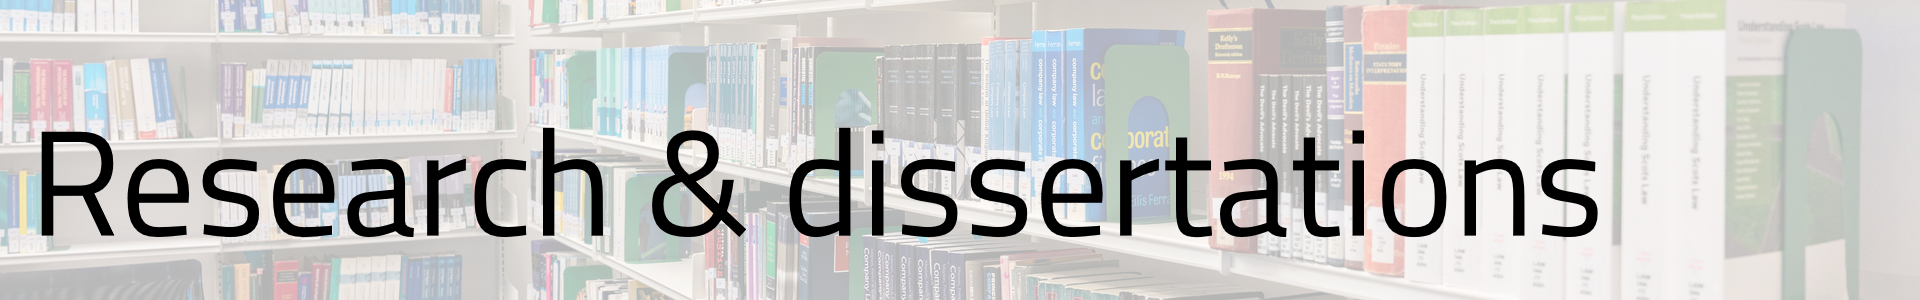 Research & dissertations